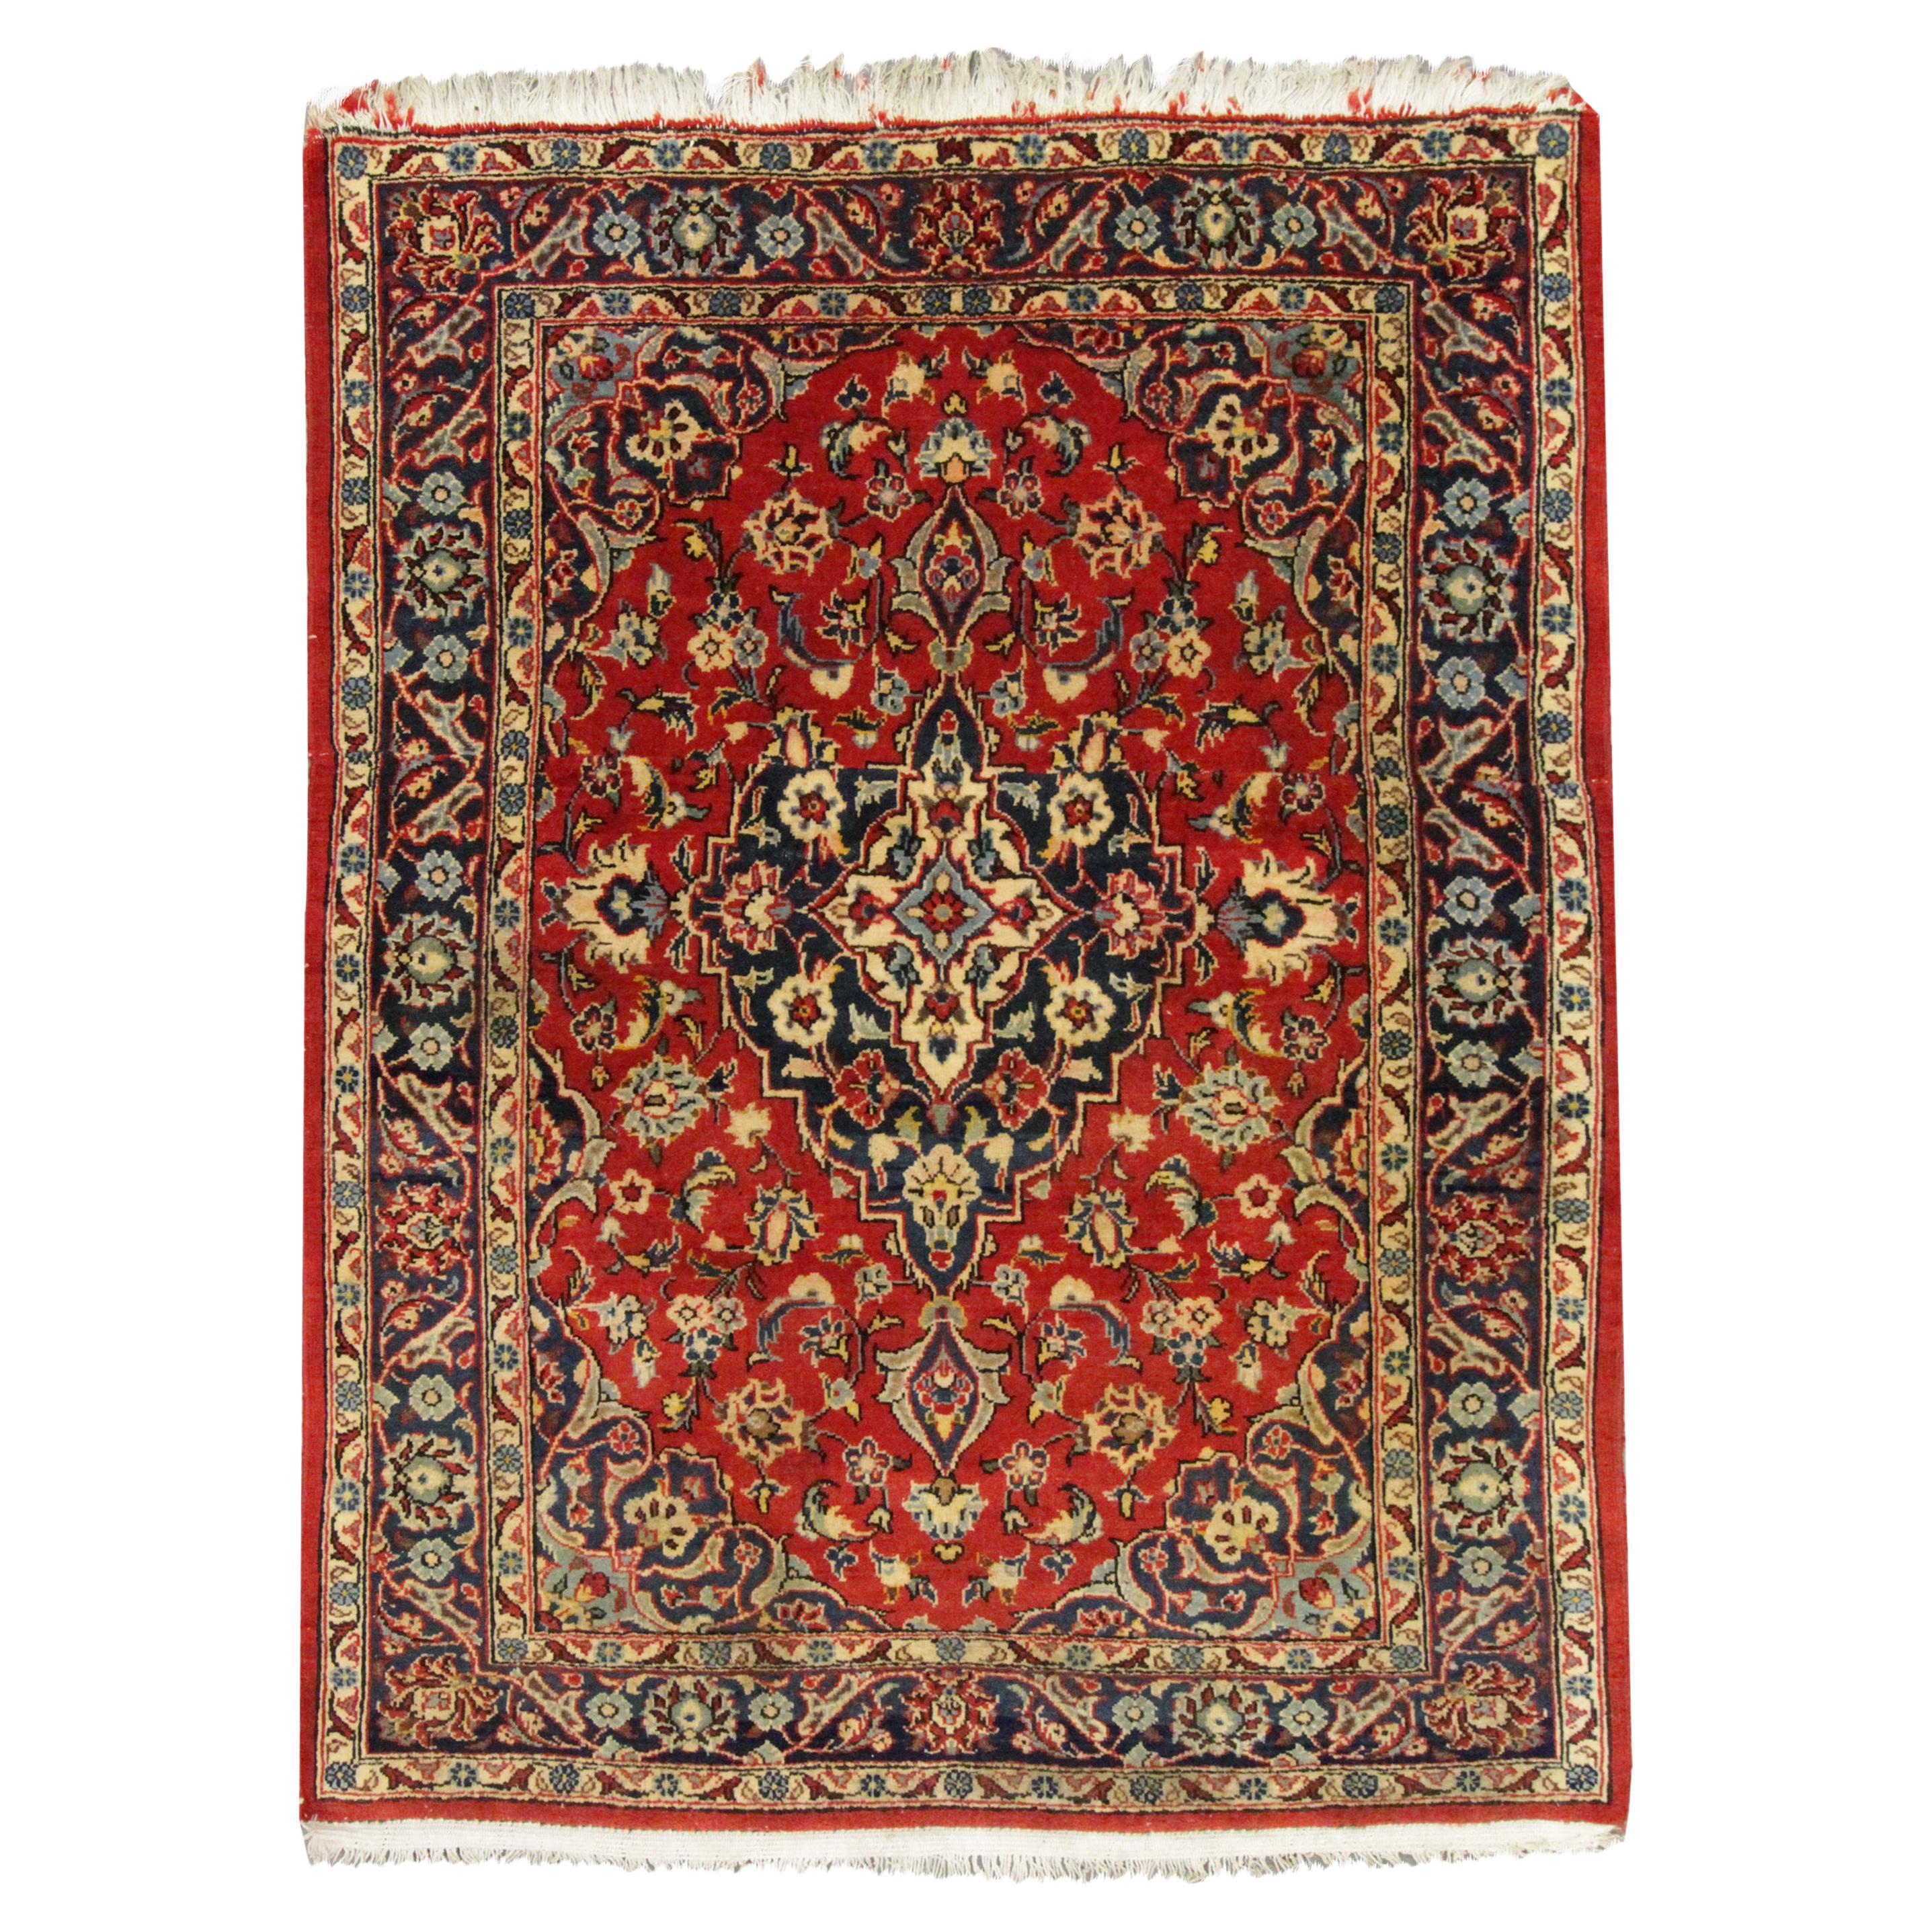 Small Living Area Rug Handwoven Red Oriental Wool Carpet Traditional For Sale